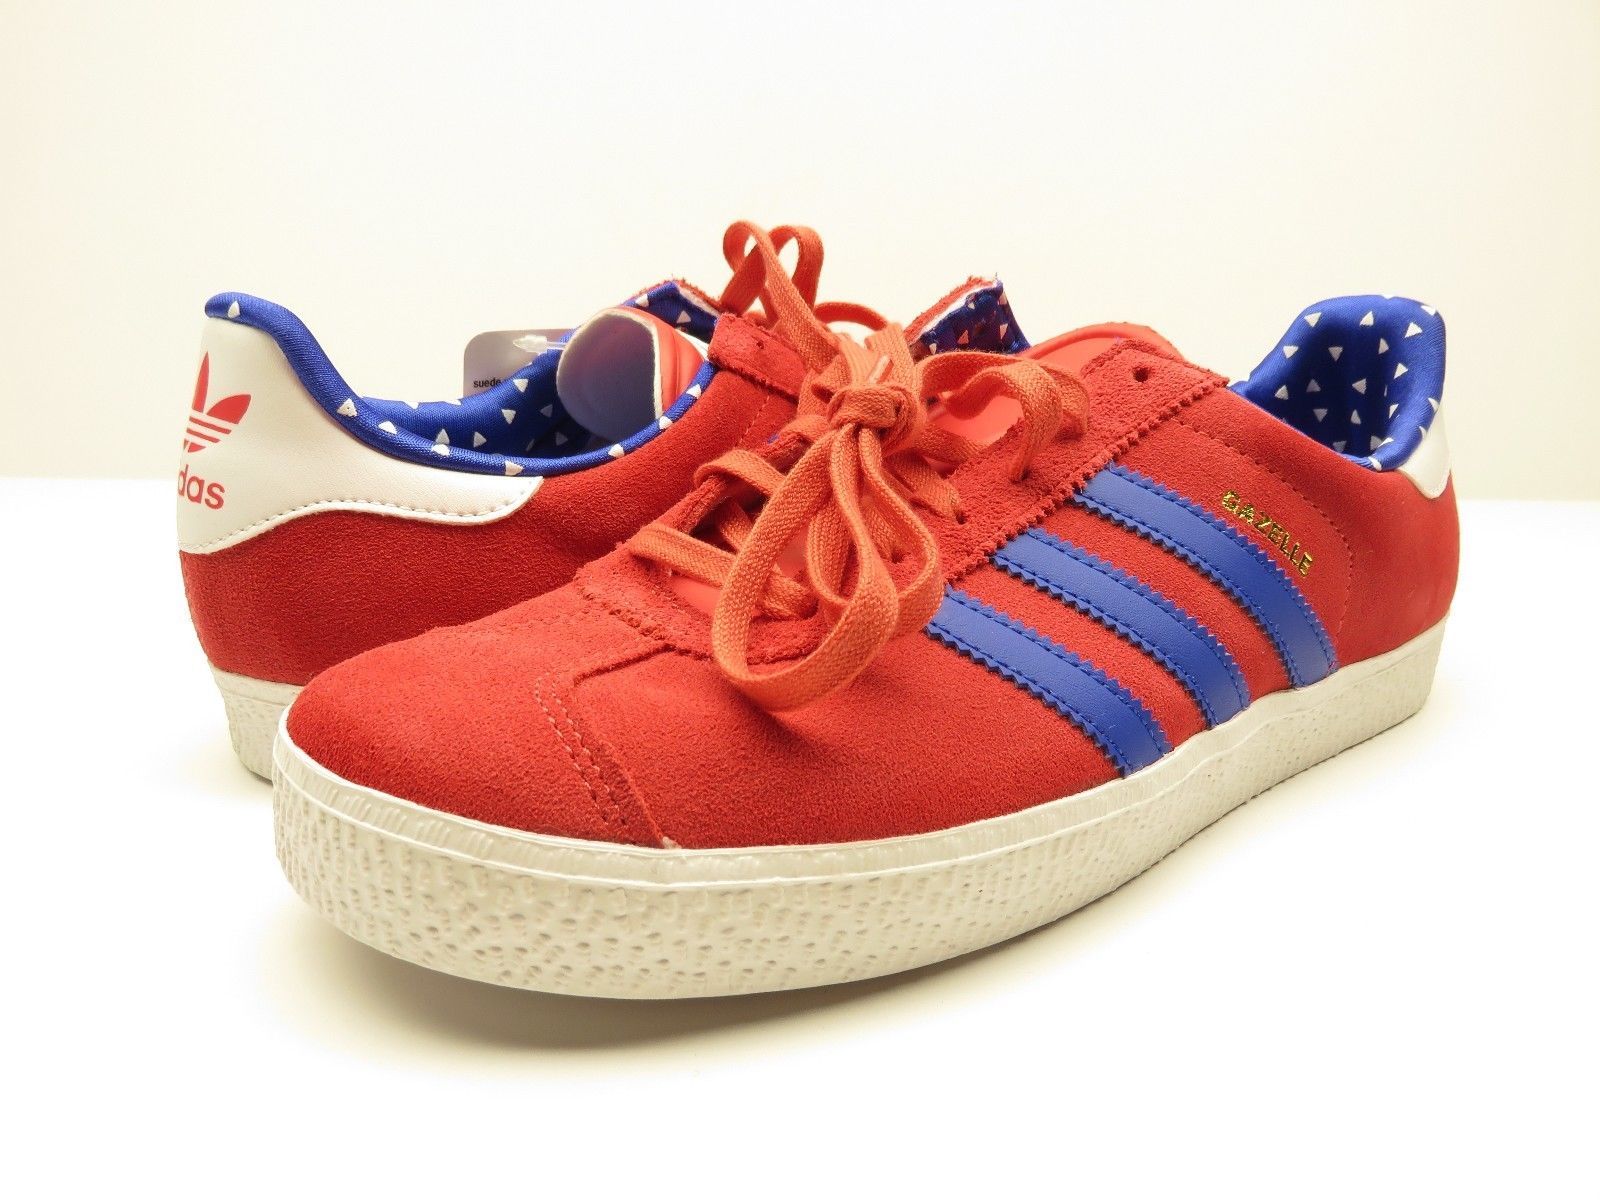 NEW Adidas Gazelle 2 J Casual Sneaker Red, White, Blue Shoes Youth Size 6 - $55.40